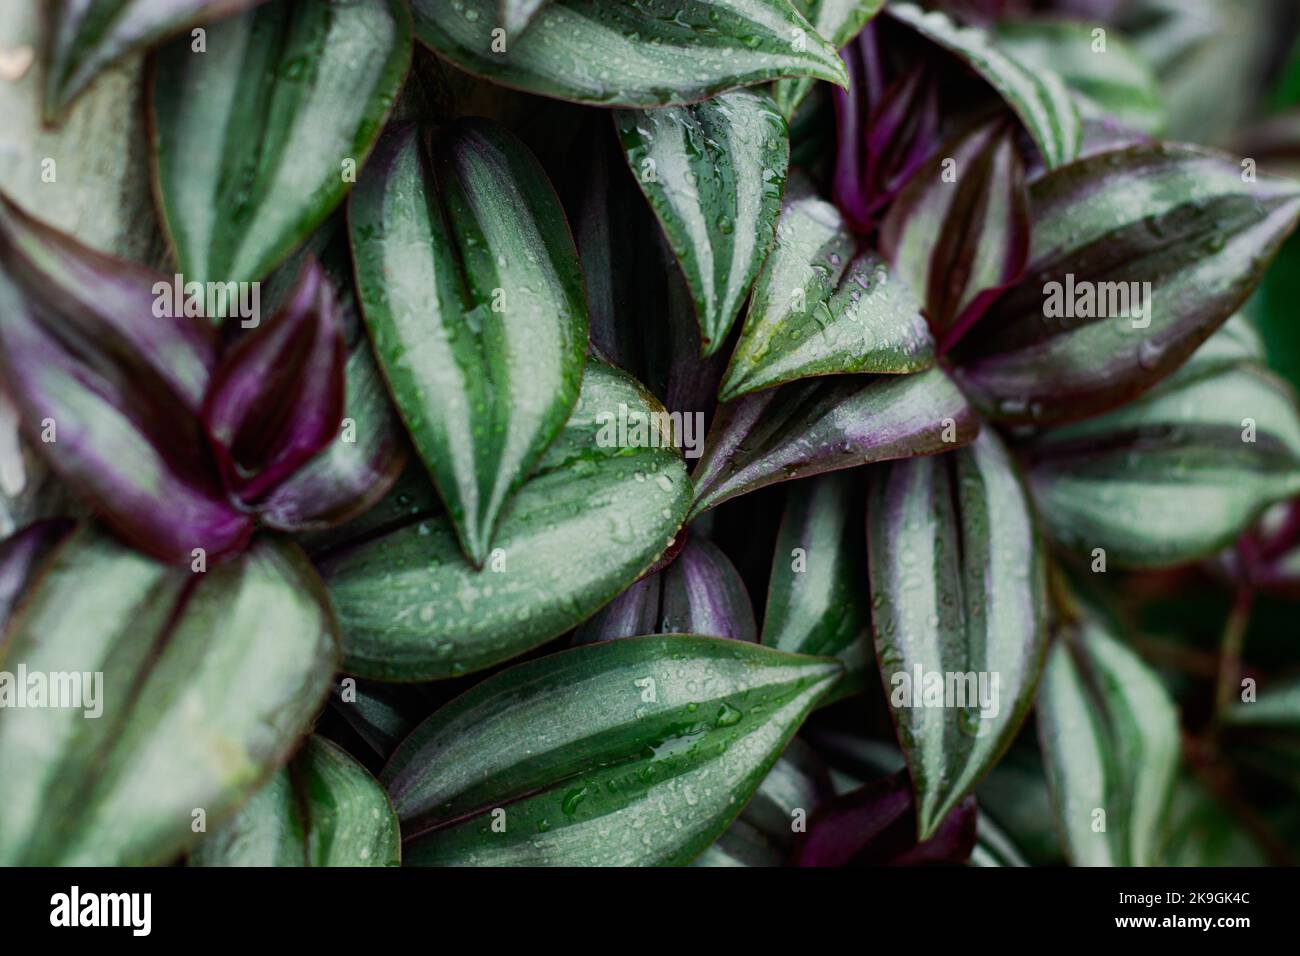 Close up texture and pattern of the colorful leaves of Tradescantia zebrina or inchplant Stock Photo